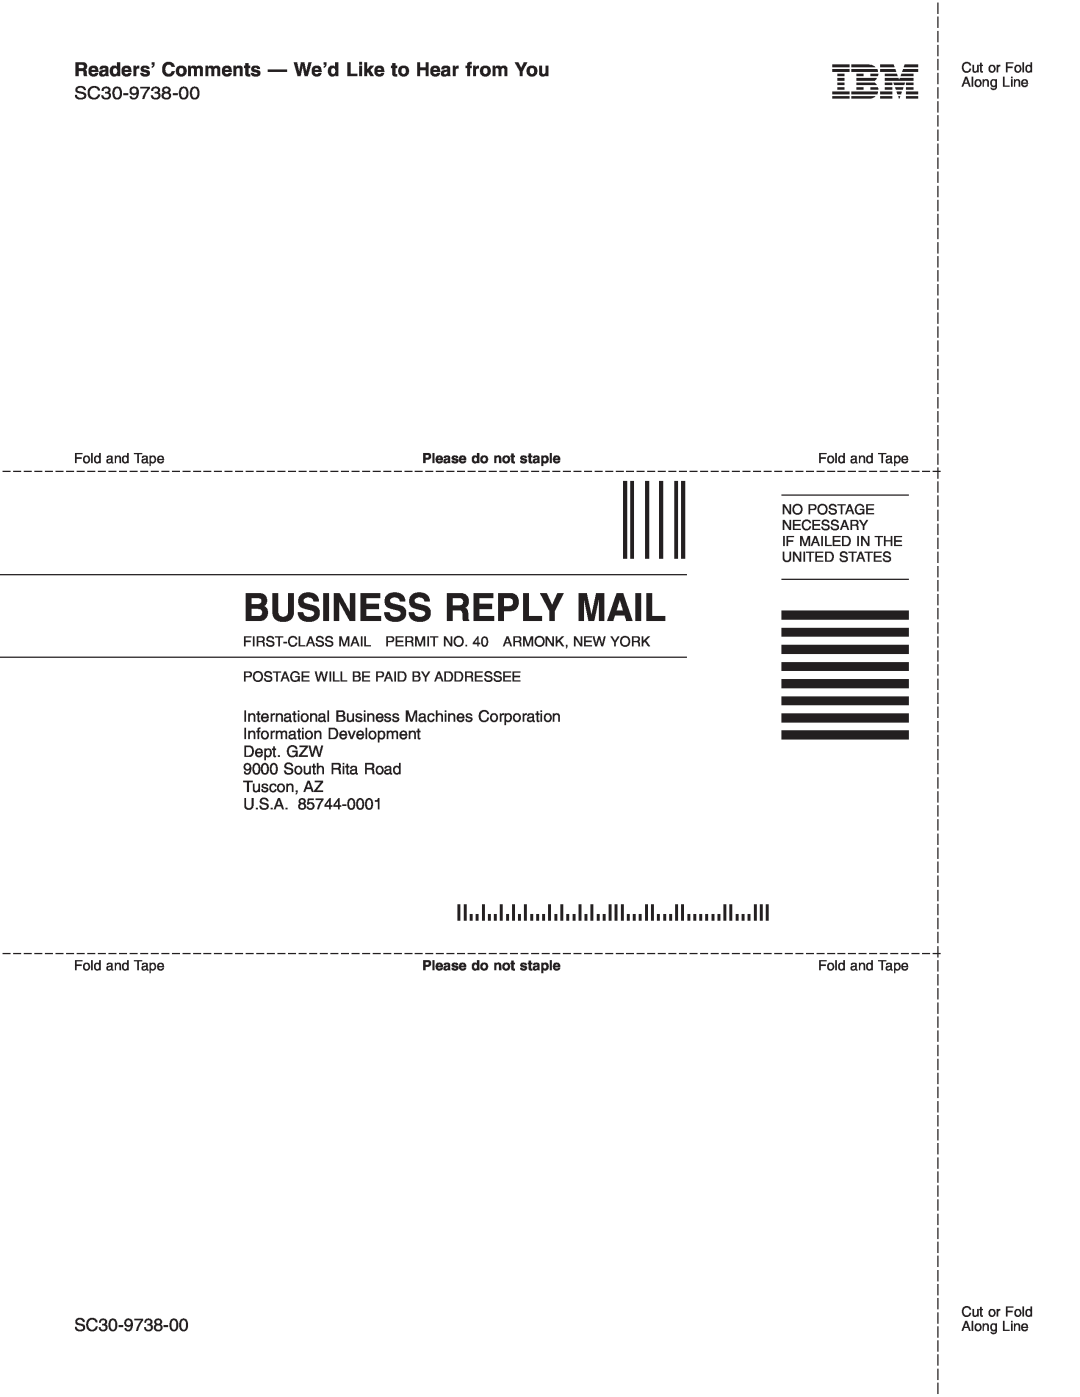 IBM DCS9550 1S1 manual Business Reply Mail, Readers’ Comments - We’d Like to Hear from You, Please do not staple 